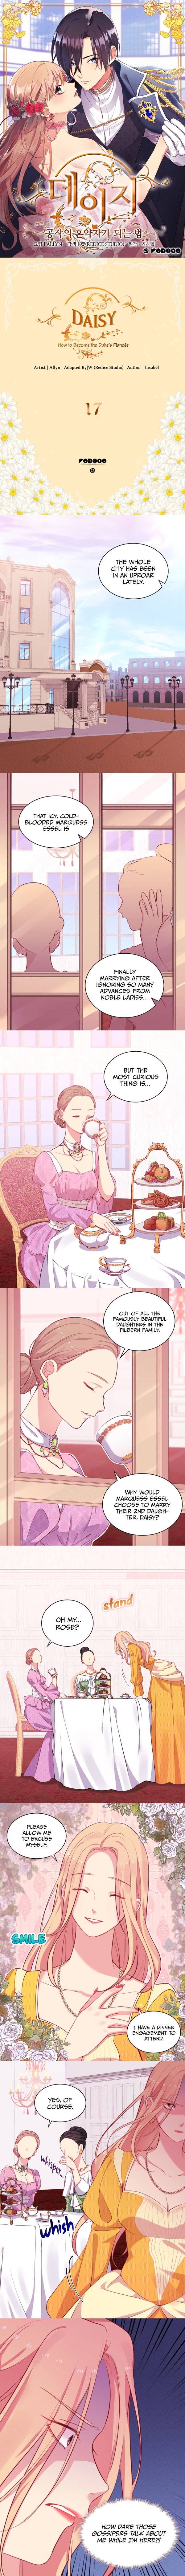 Daisy: How to Become the Duke’s Fiancée Chapter 17 - Page 1